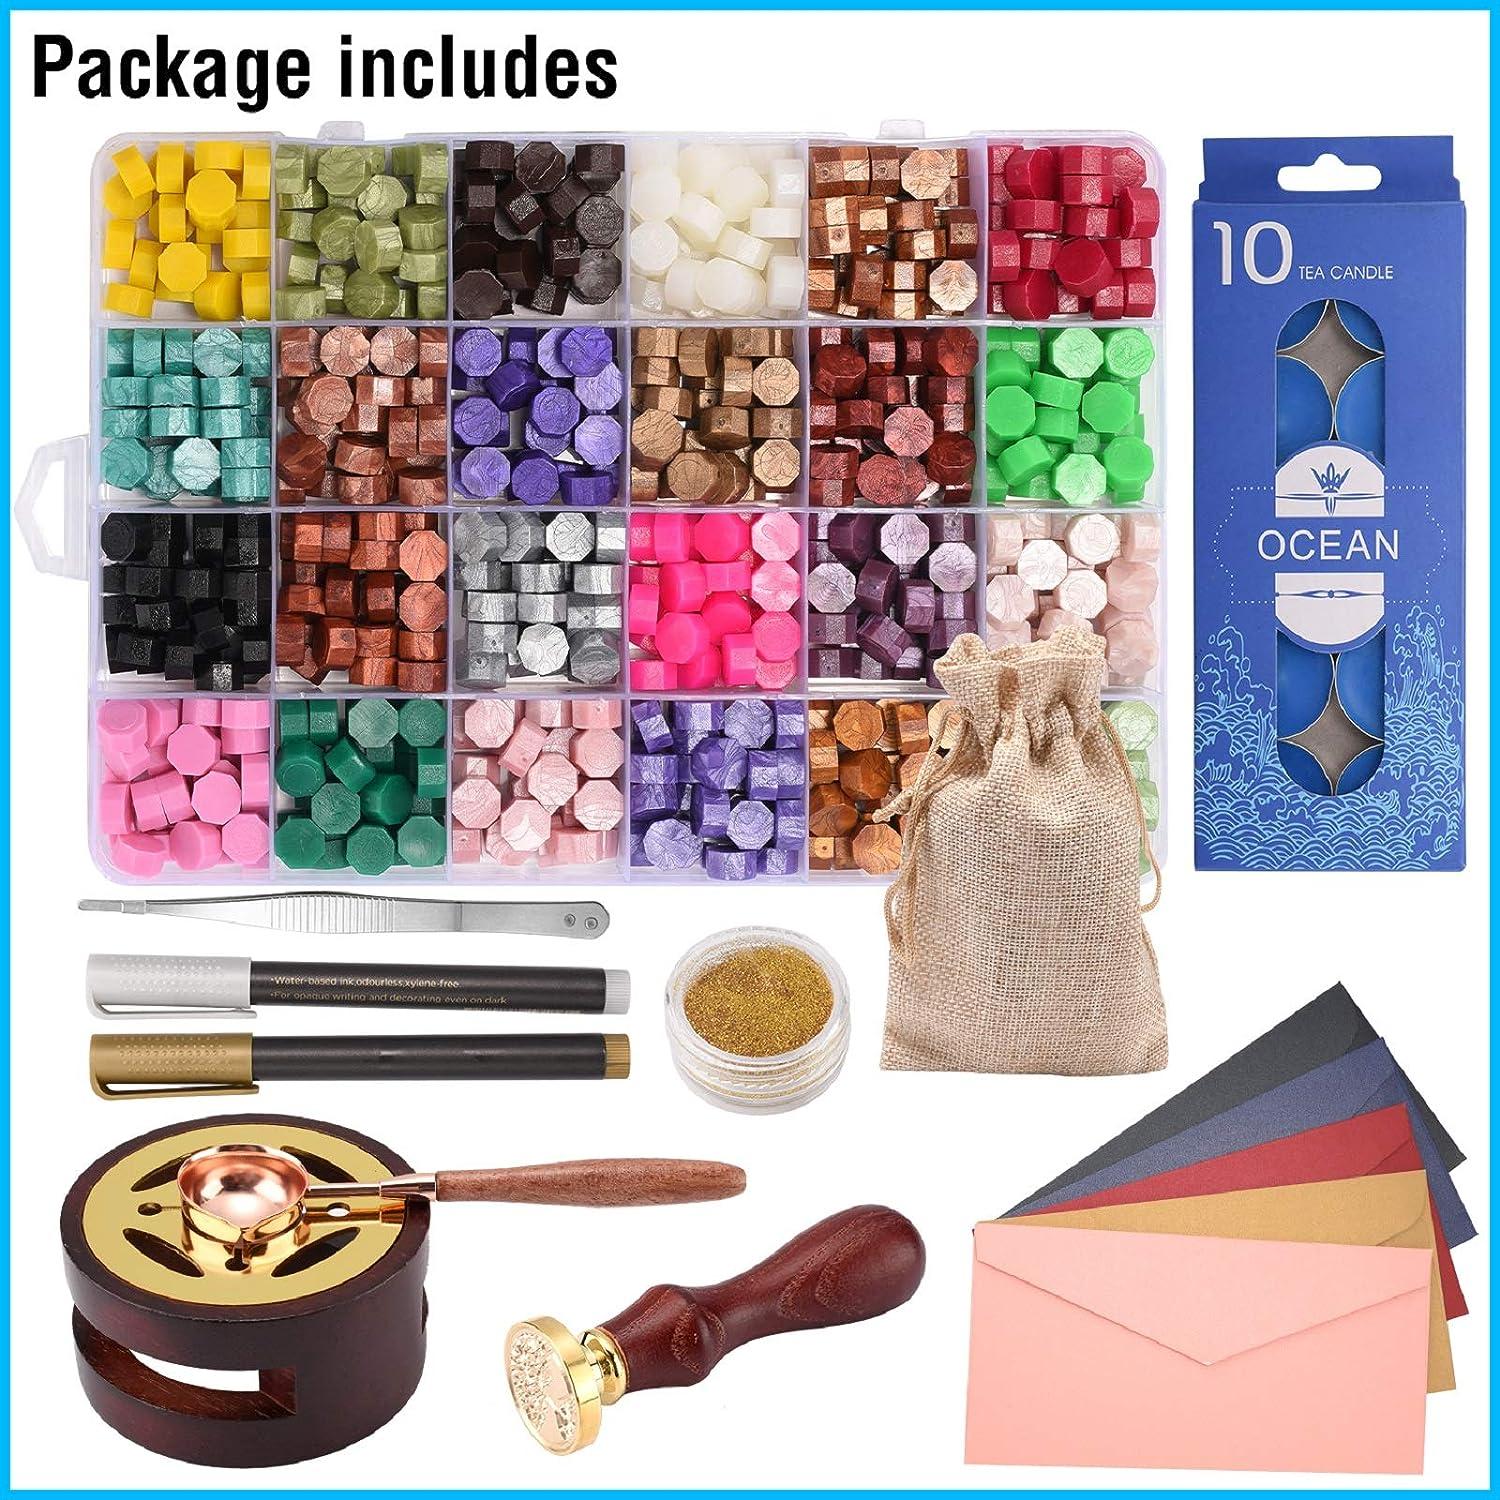 Upgraded Wax Seal Stamp Kit, Anezus 790pcs Sealing Wax Kit with Wax Seal  Beads, Wax Stamp, Wax Warmer, Vintage Envelopes, and Gift Box for Letter